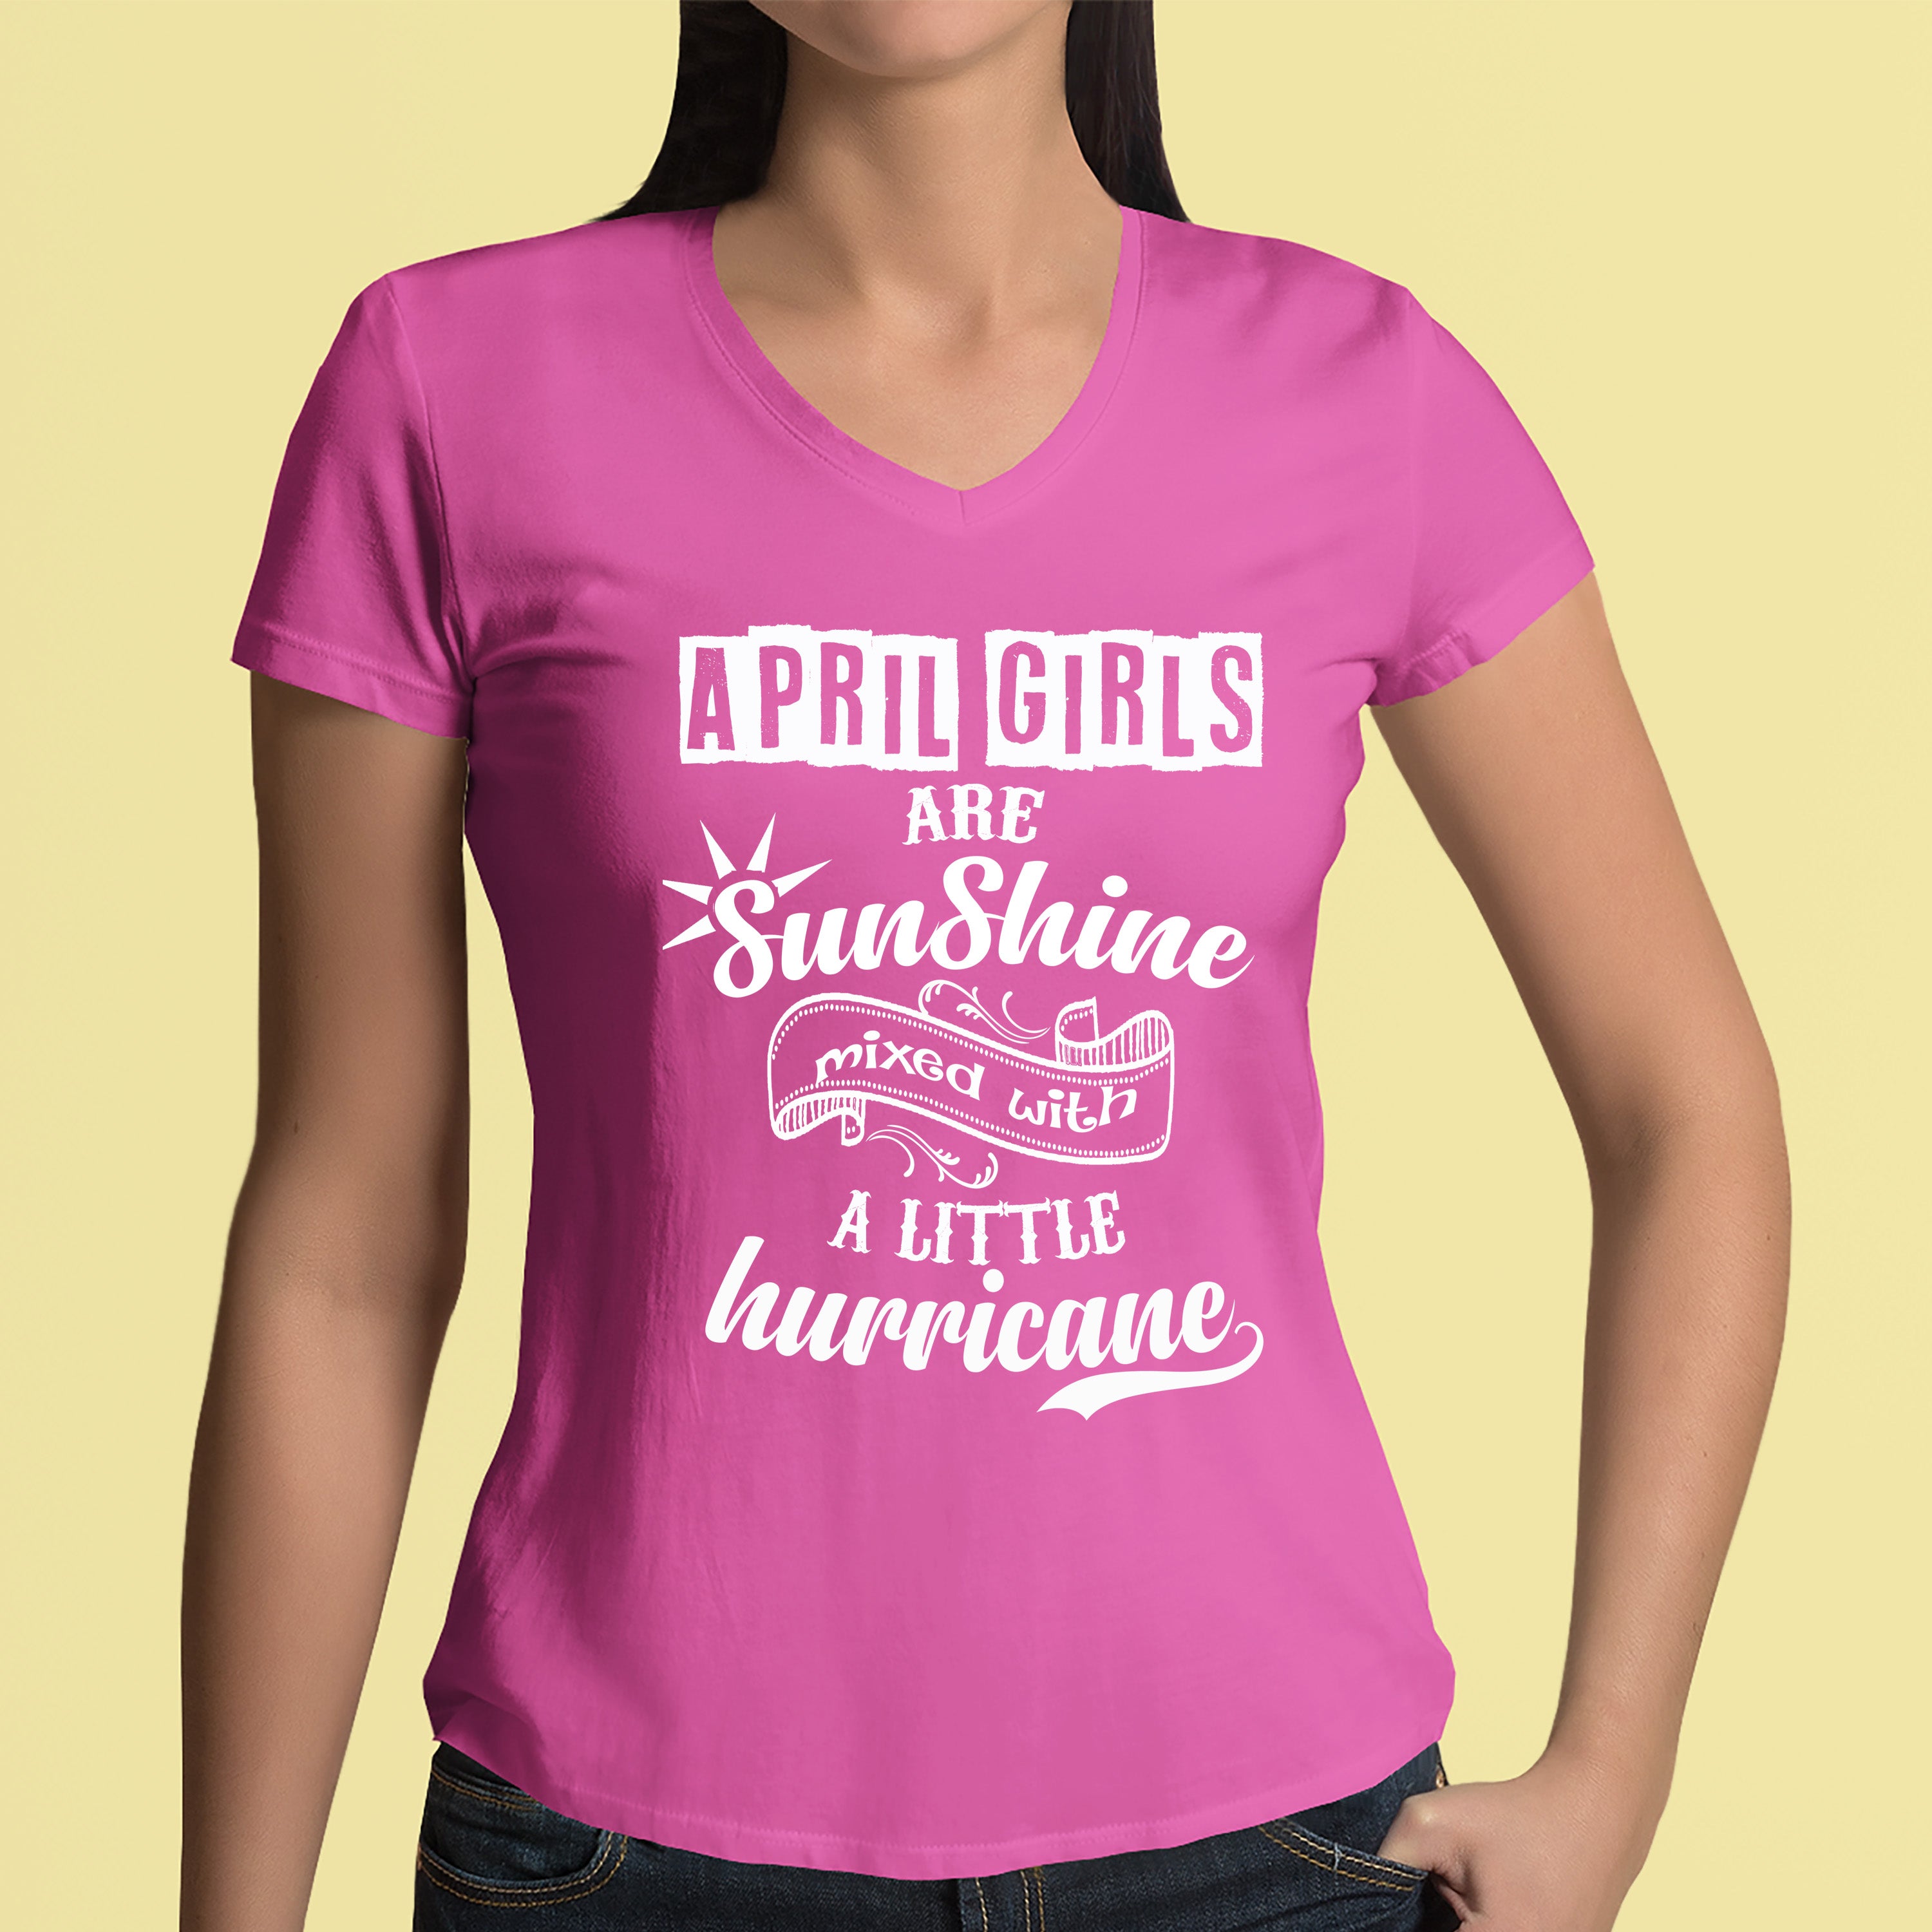 "April Girls Are Sunshine Mixed With Hurricane" -Pink